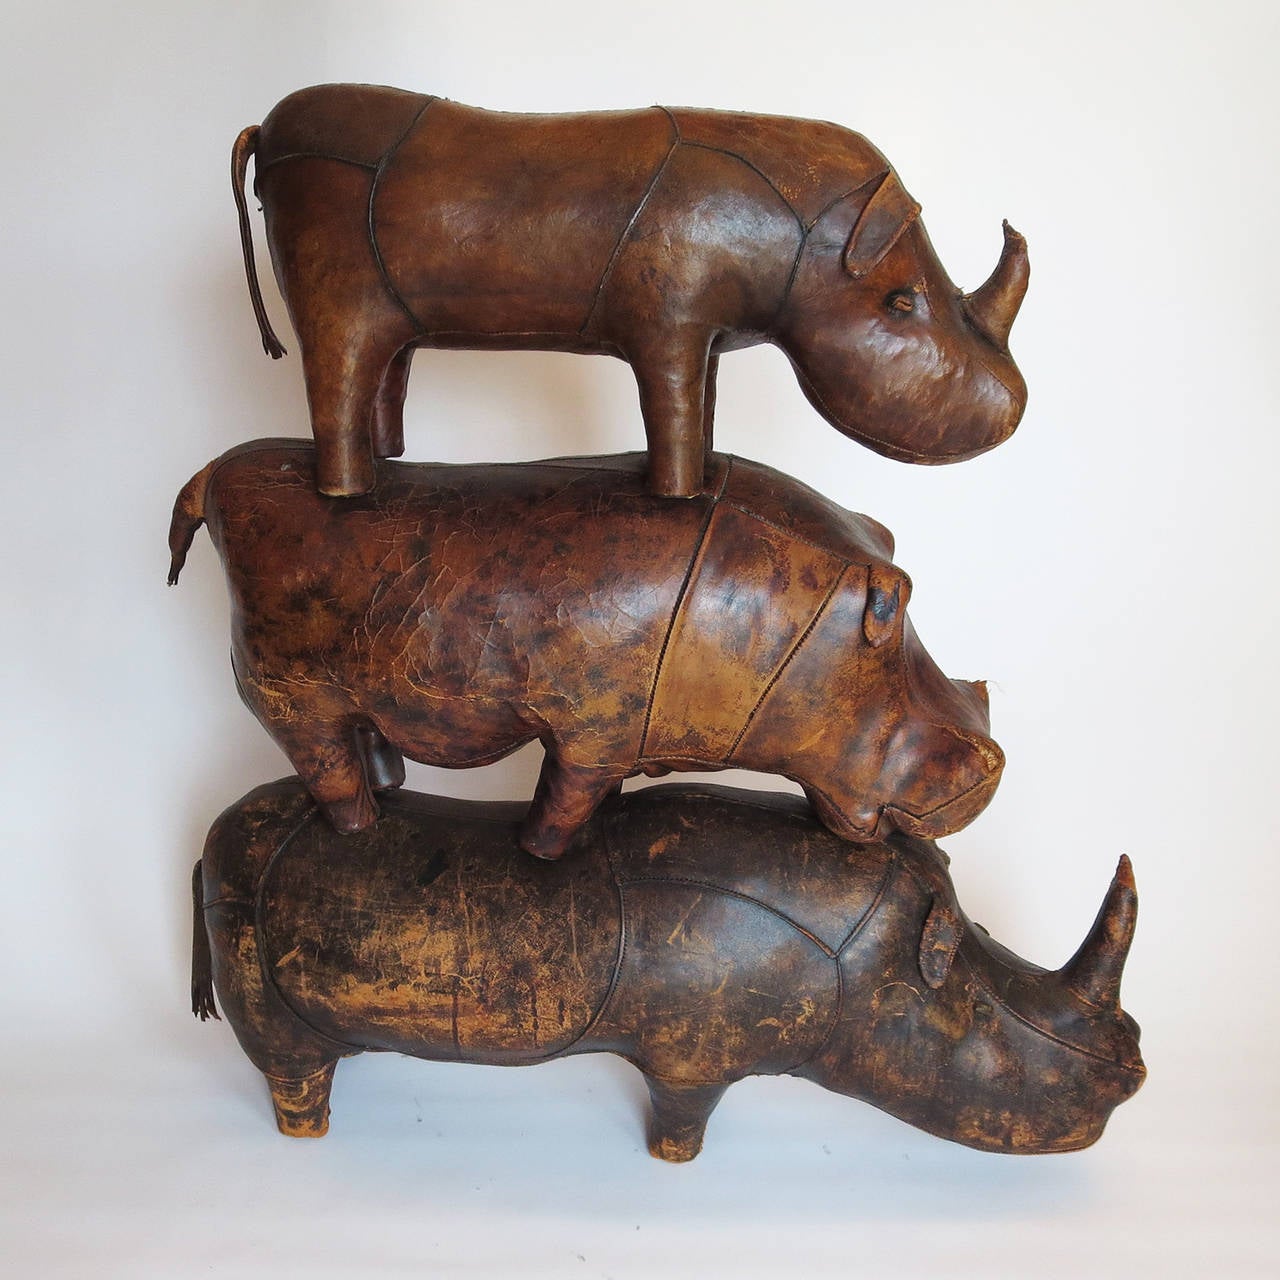 Trio of Leather Animals Sculptures by Dimitri Omersa for Abercrombie and Fitch 1